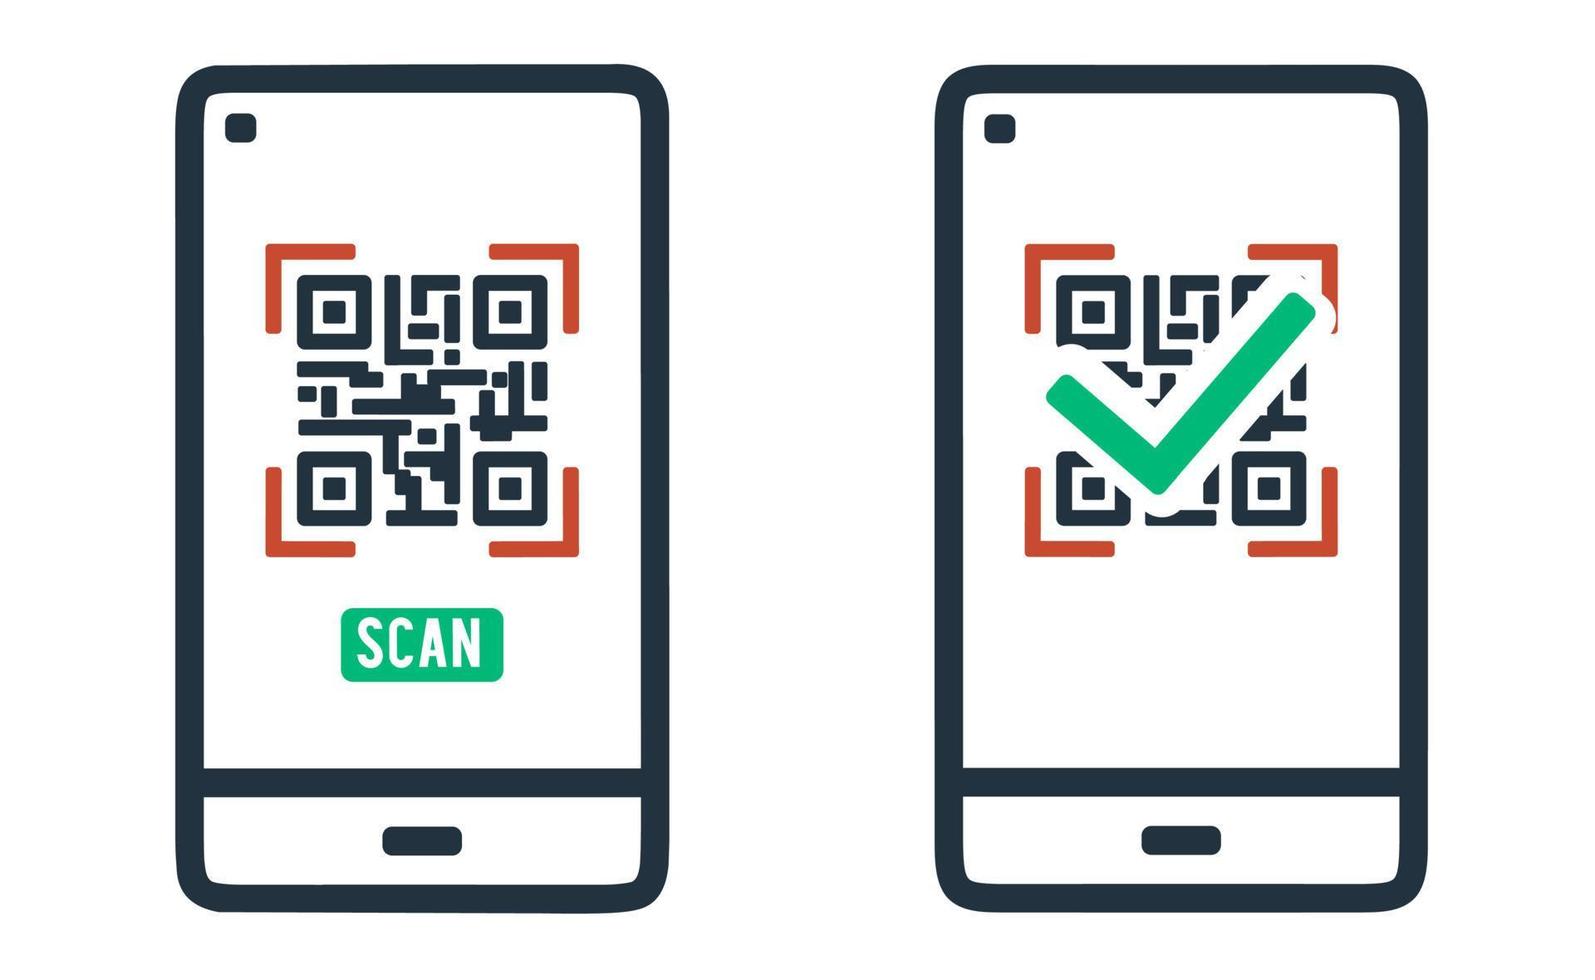 QR code scanning icon on smartphone on white background. Barcode scanner symbol for payments, promos, web, mobile apps. Vector illustration.